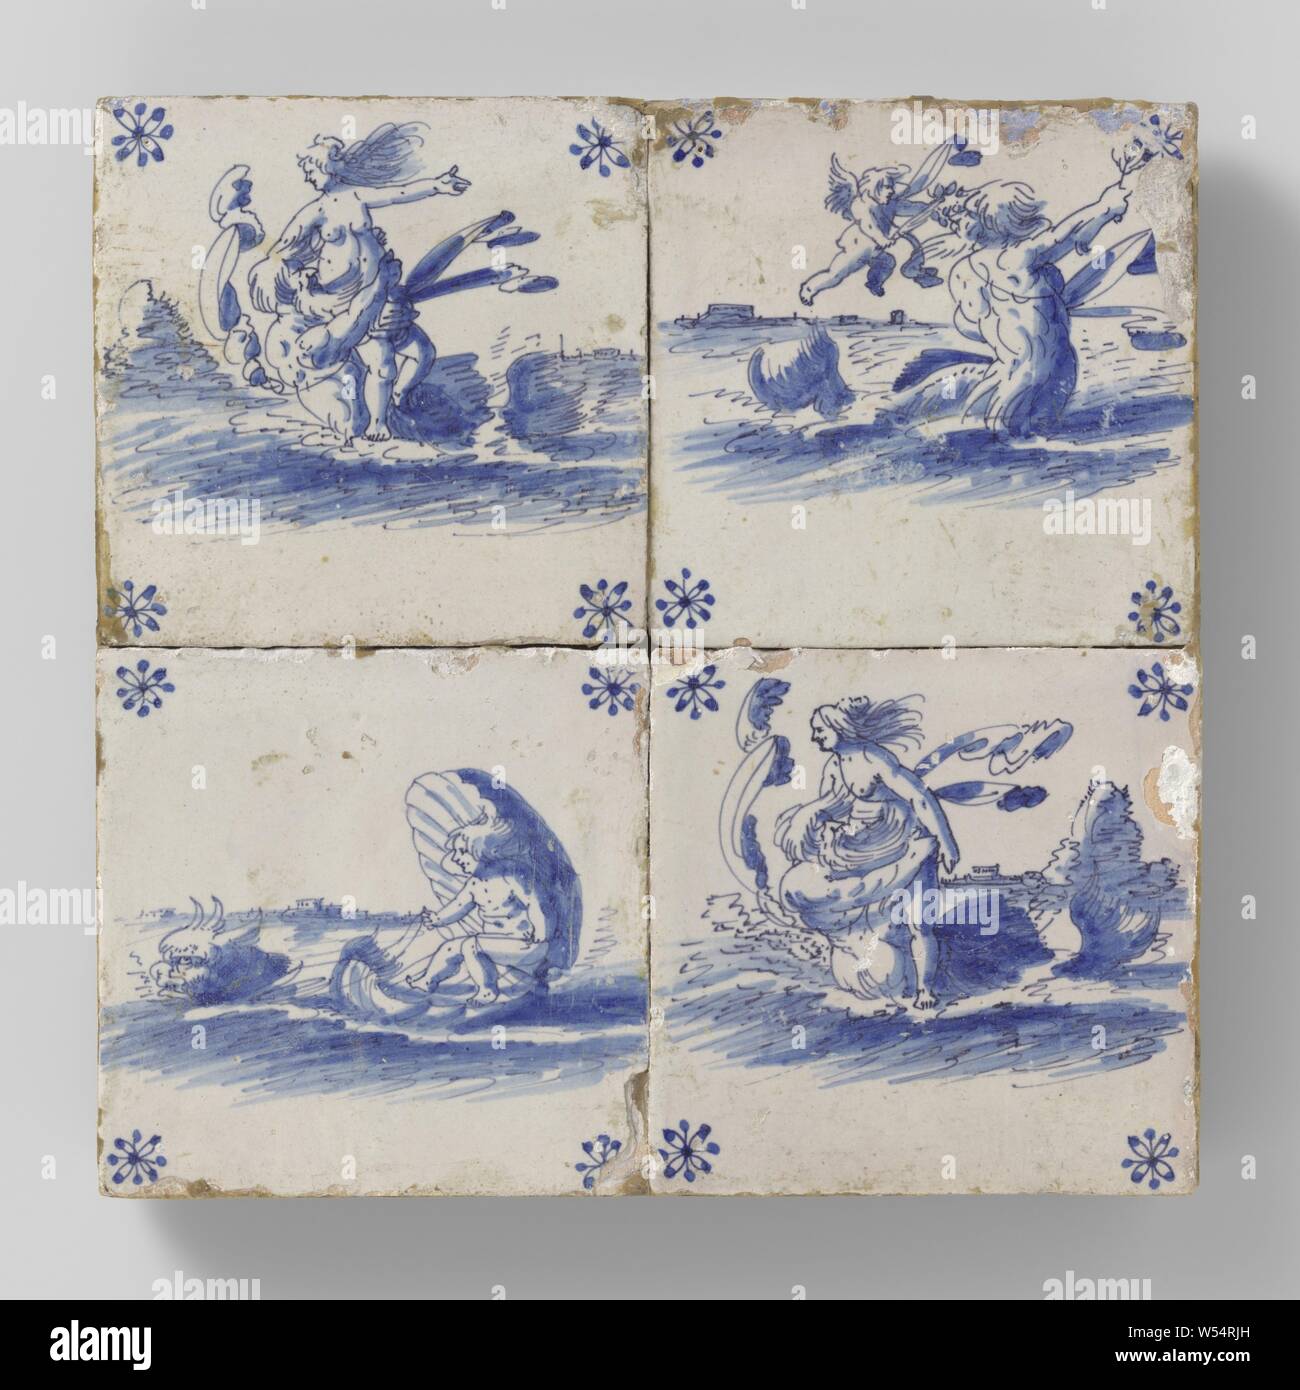 Field of four tiles with sea creatures, Field of four tiles (2 x 2) each with a blue and purple painted sea creature with a spider in the corners., anonymous, Harlingen (possibly), c. 1650 - c. 1700, earthenware, tin glaze, h 26.5 cm × w 26.5 cm × d 2.5 cm Stock Photo